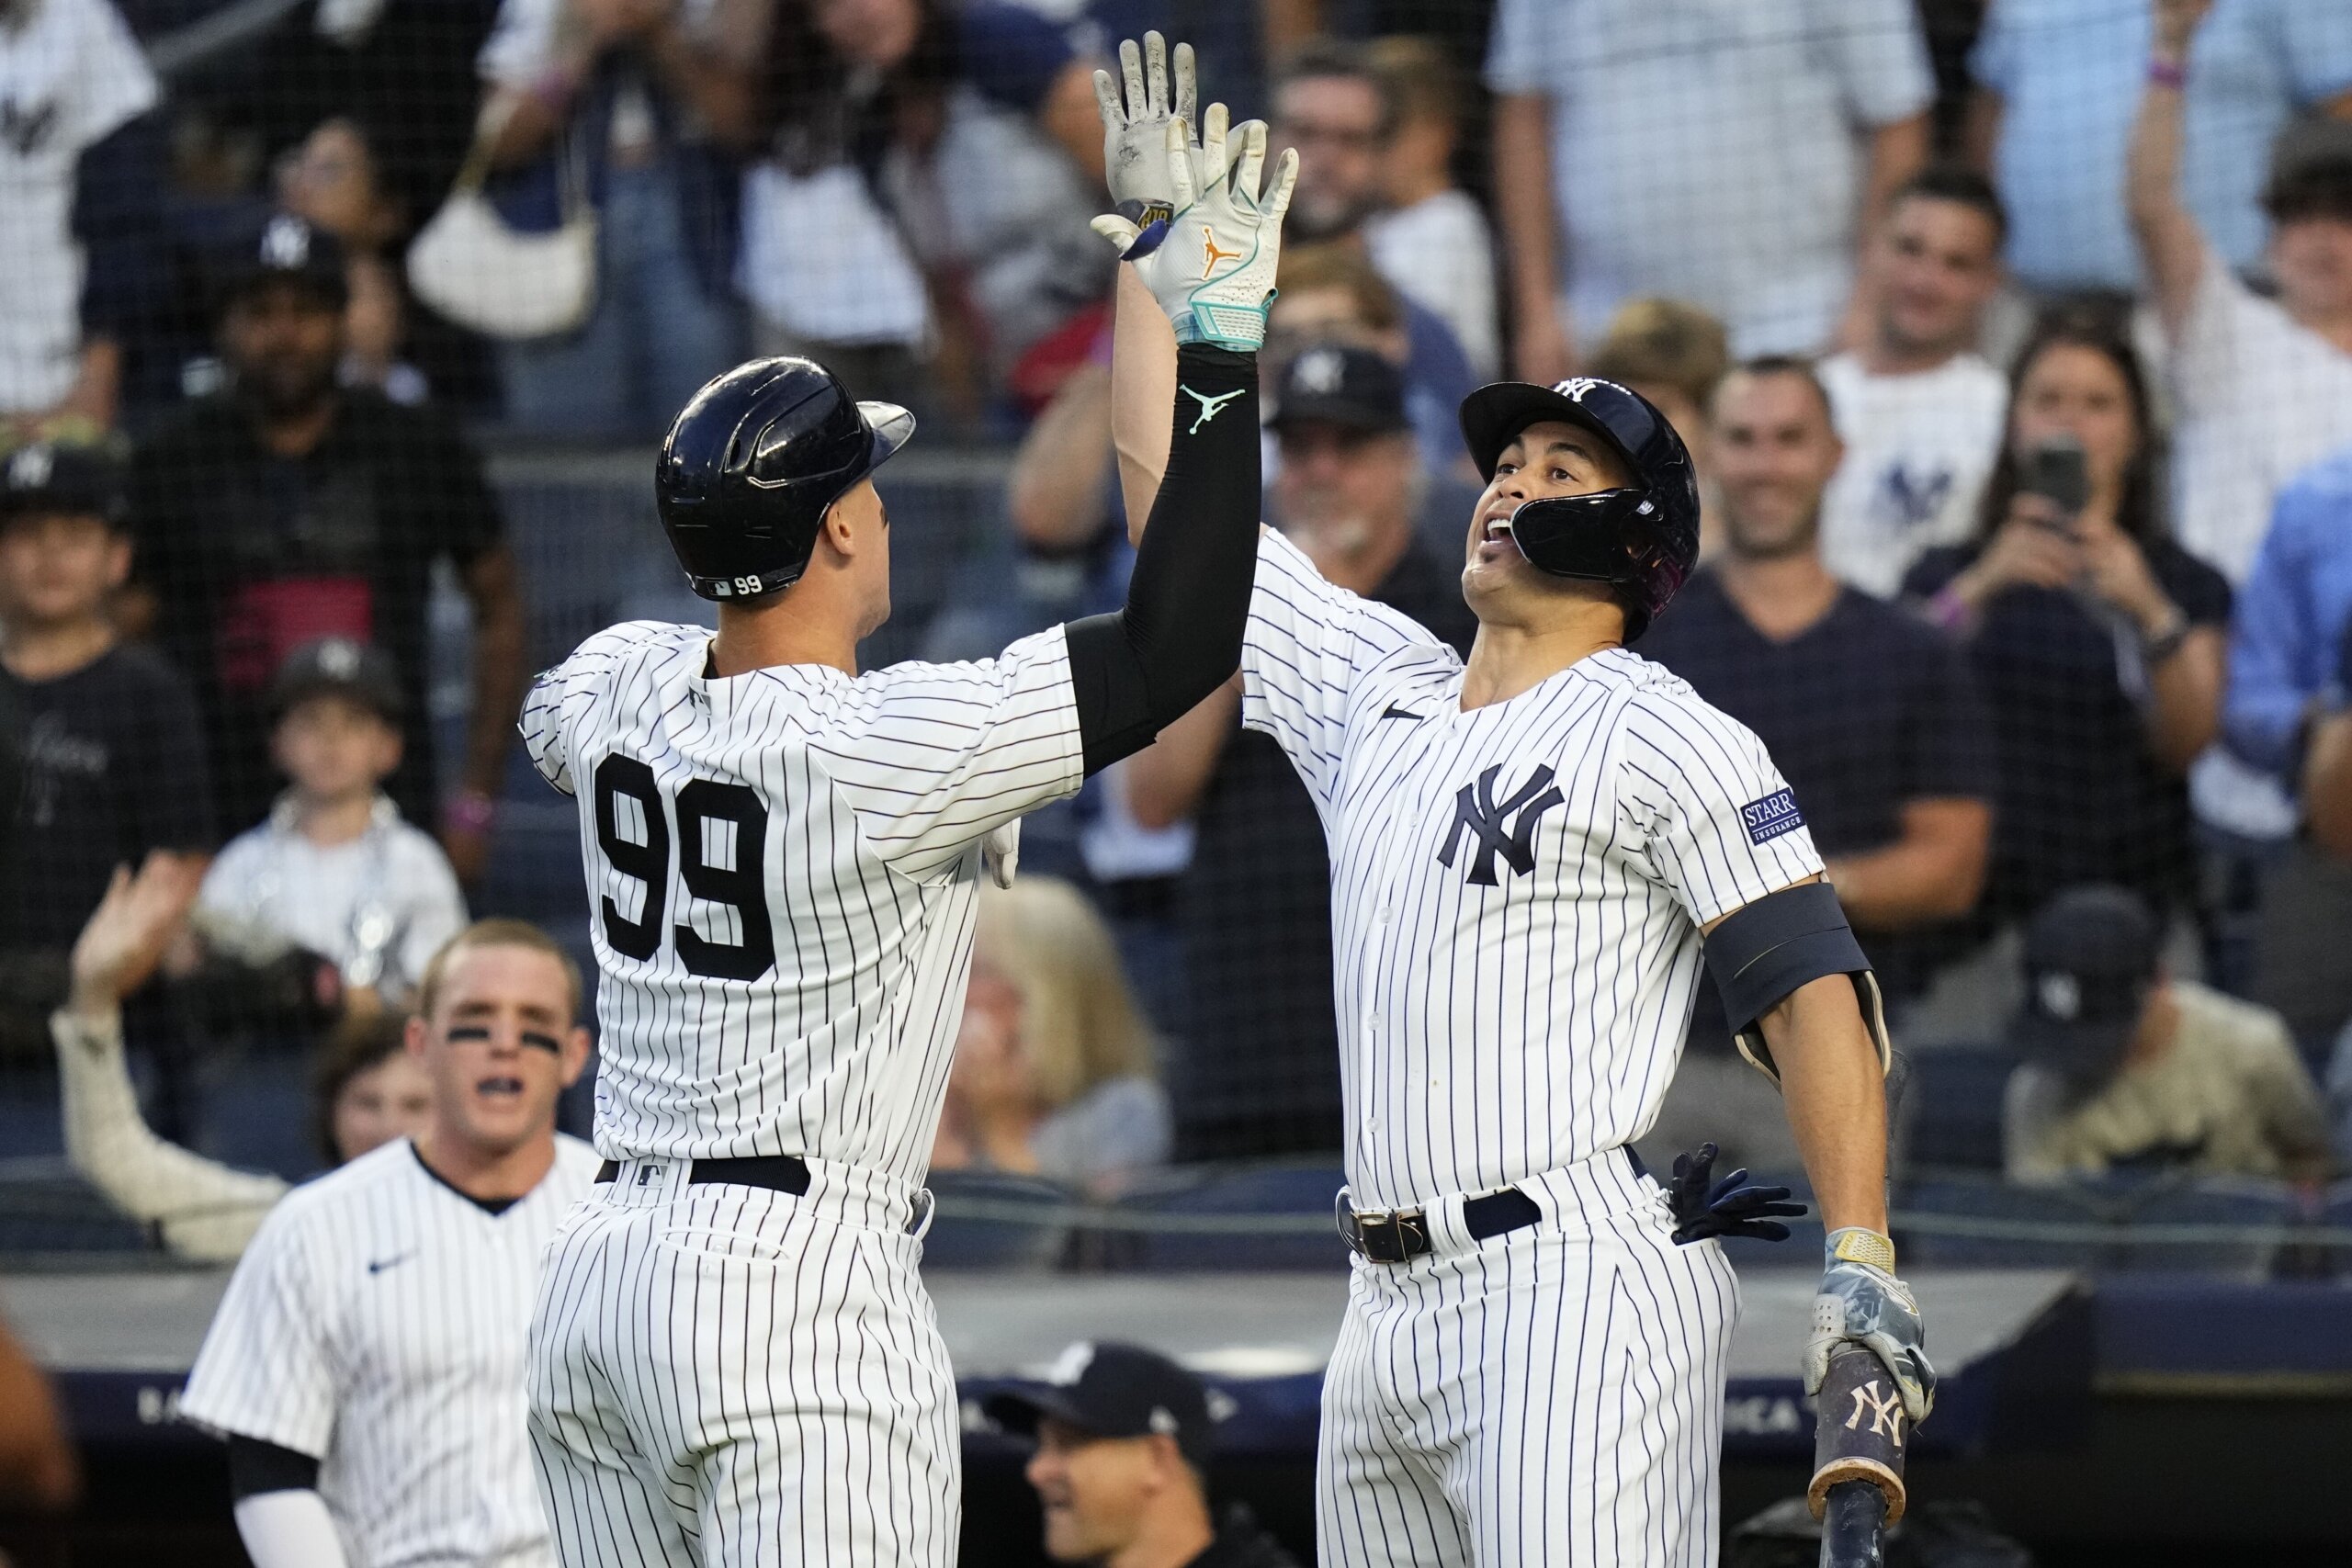 Aaron Judge has a homer and 3 hits in his 2nd game back to help